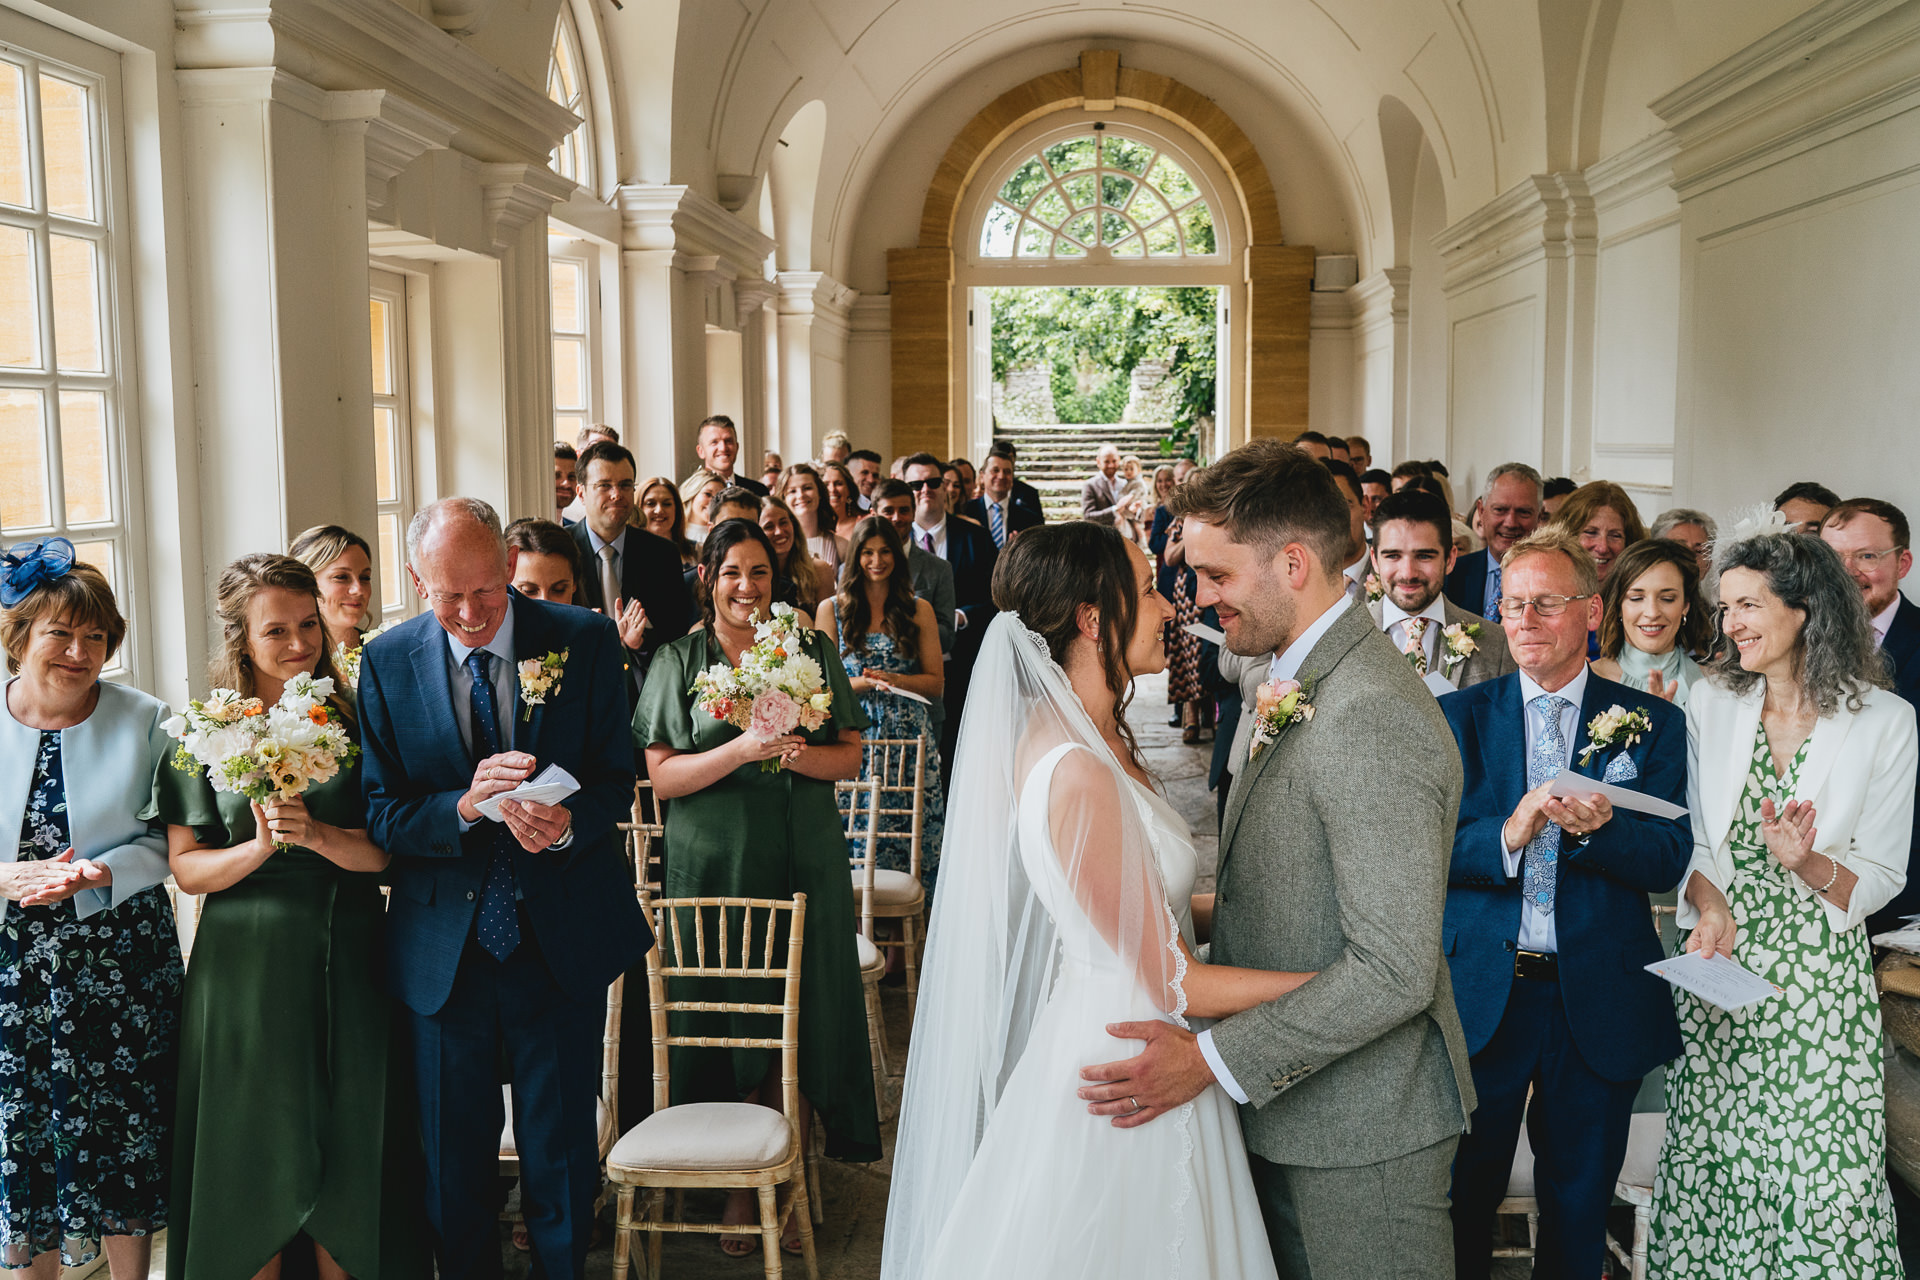 A bride and groom during their wedding ceremony in the Orangerie at Hestercombe Gardens in Somerset. The couple are cuddling and smiling at each other and the weddings guests are clapping behind them.